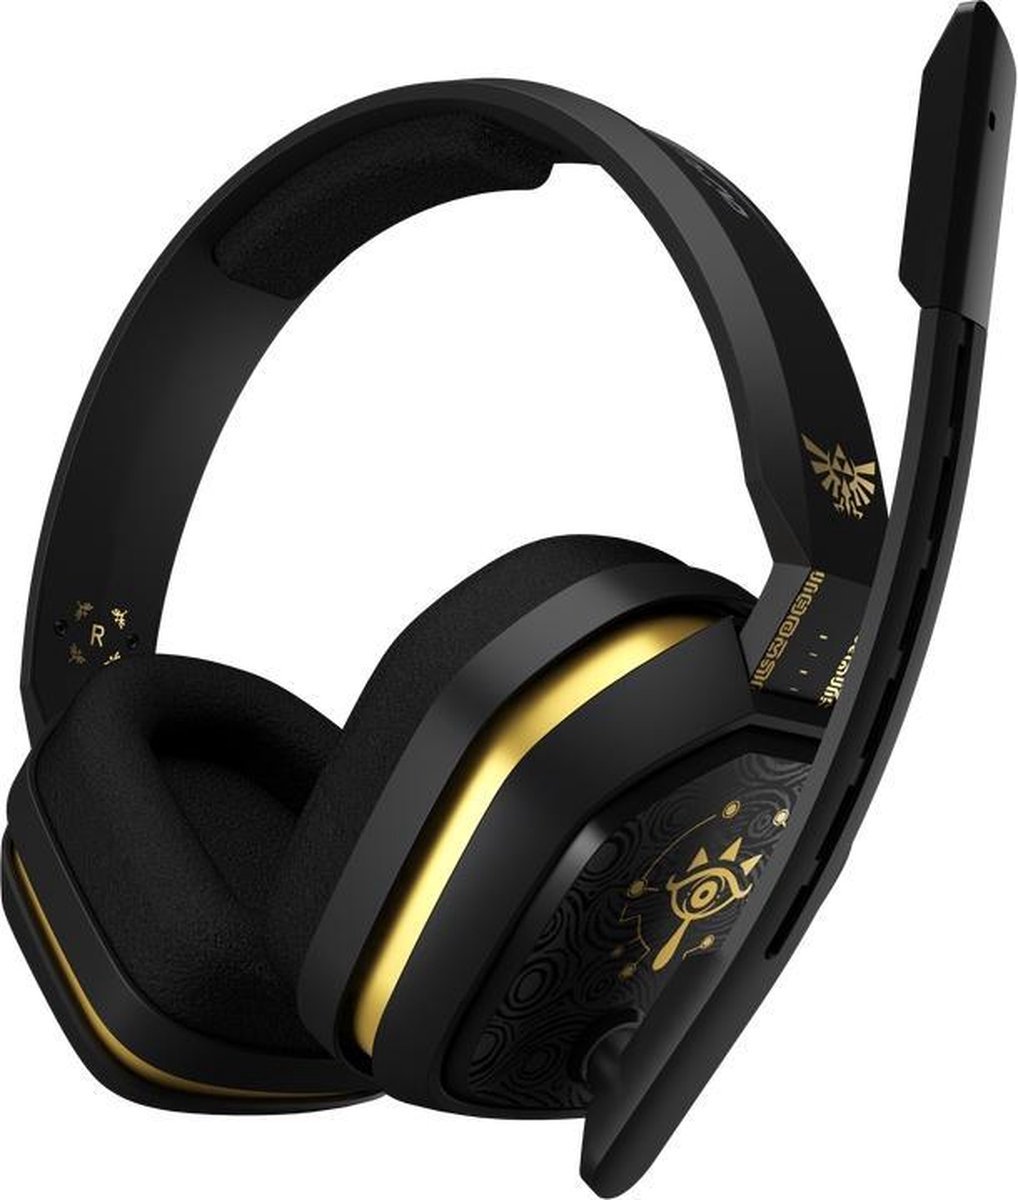 ASTRO Gaming The Legend of Zelda: Breath of the Wild A10 Headset Casque  Avec fil... | bol